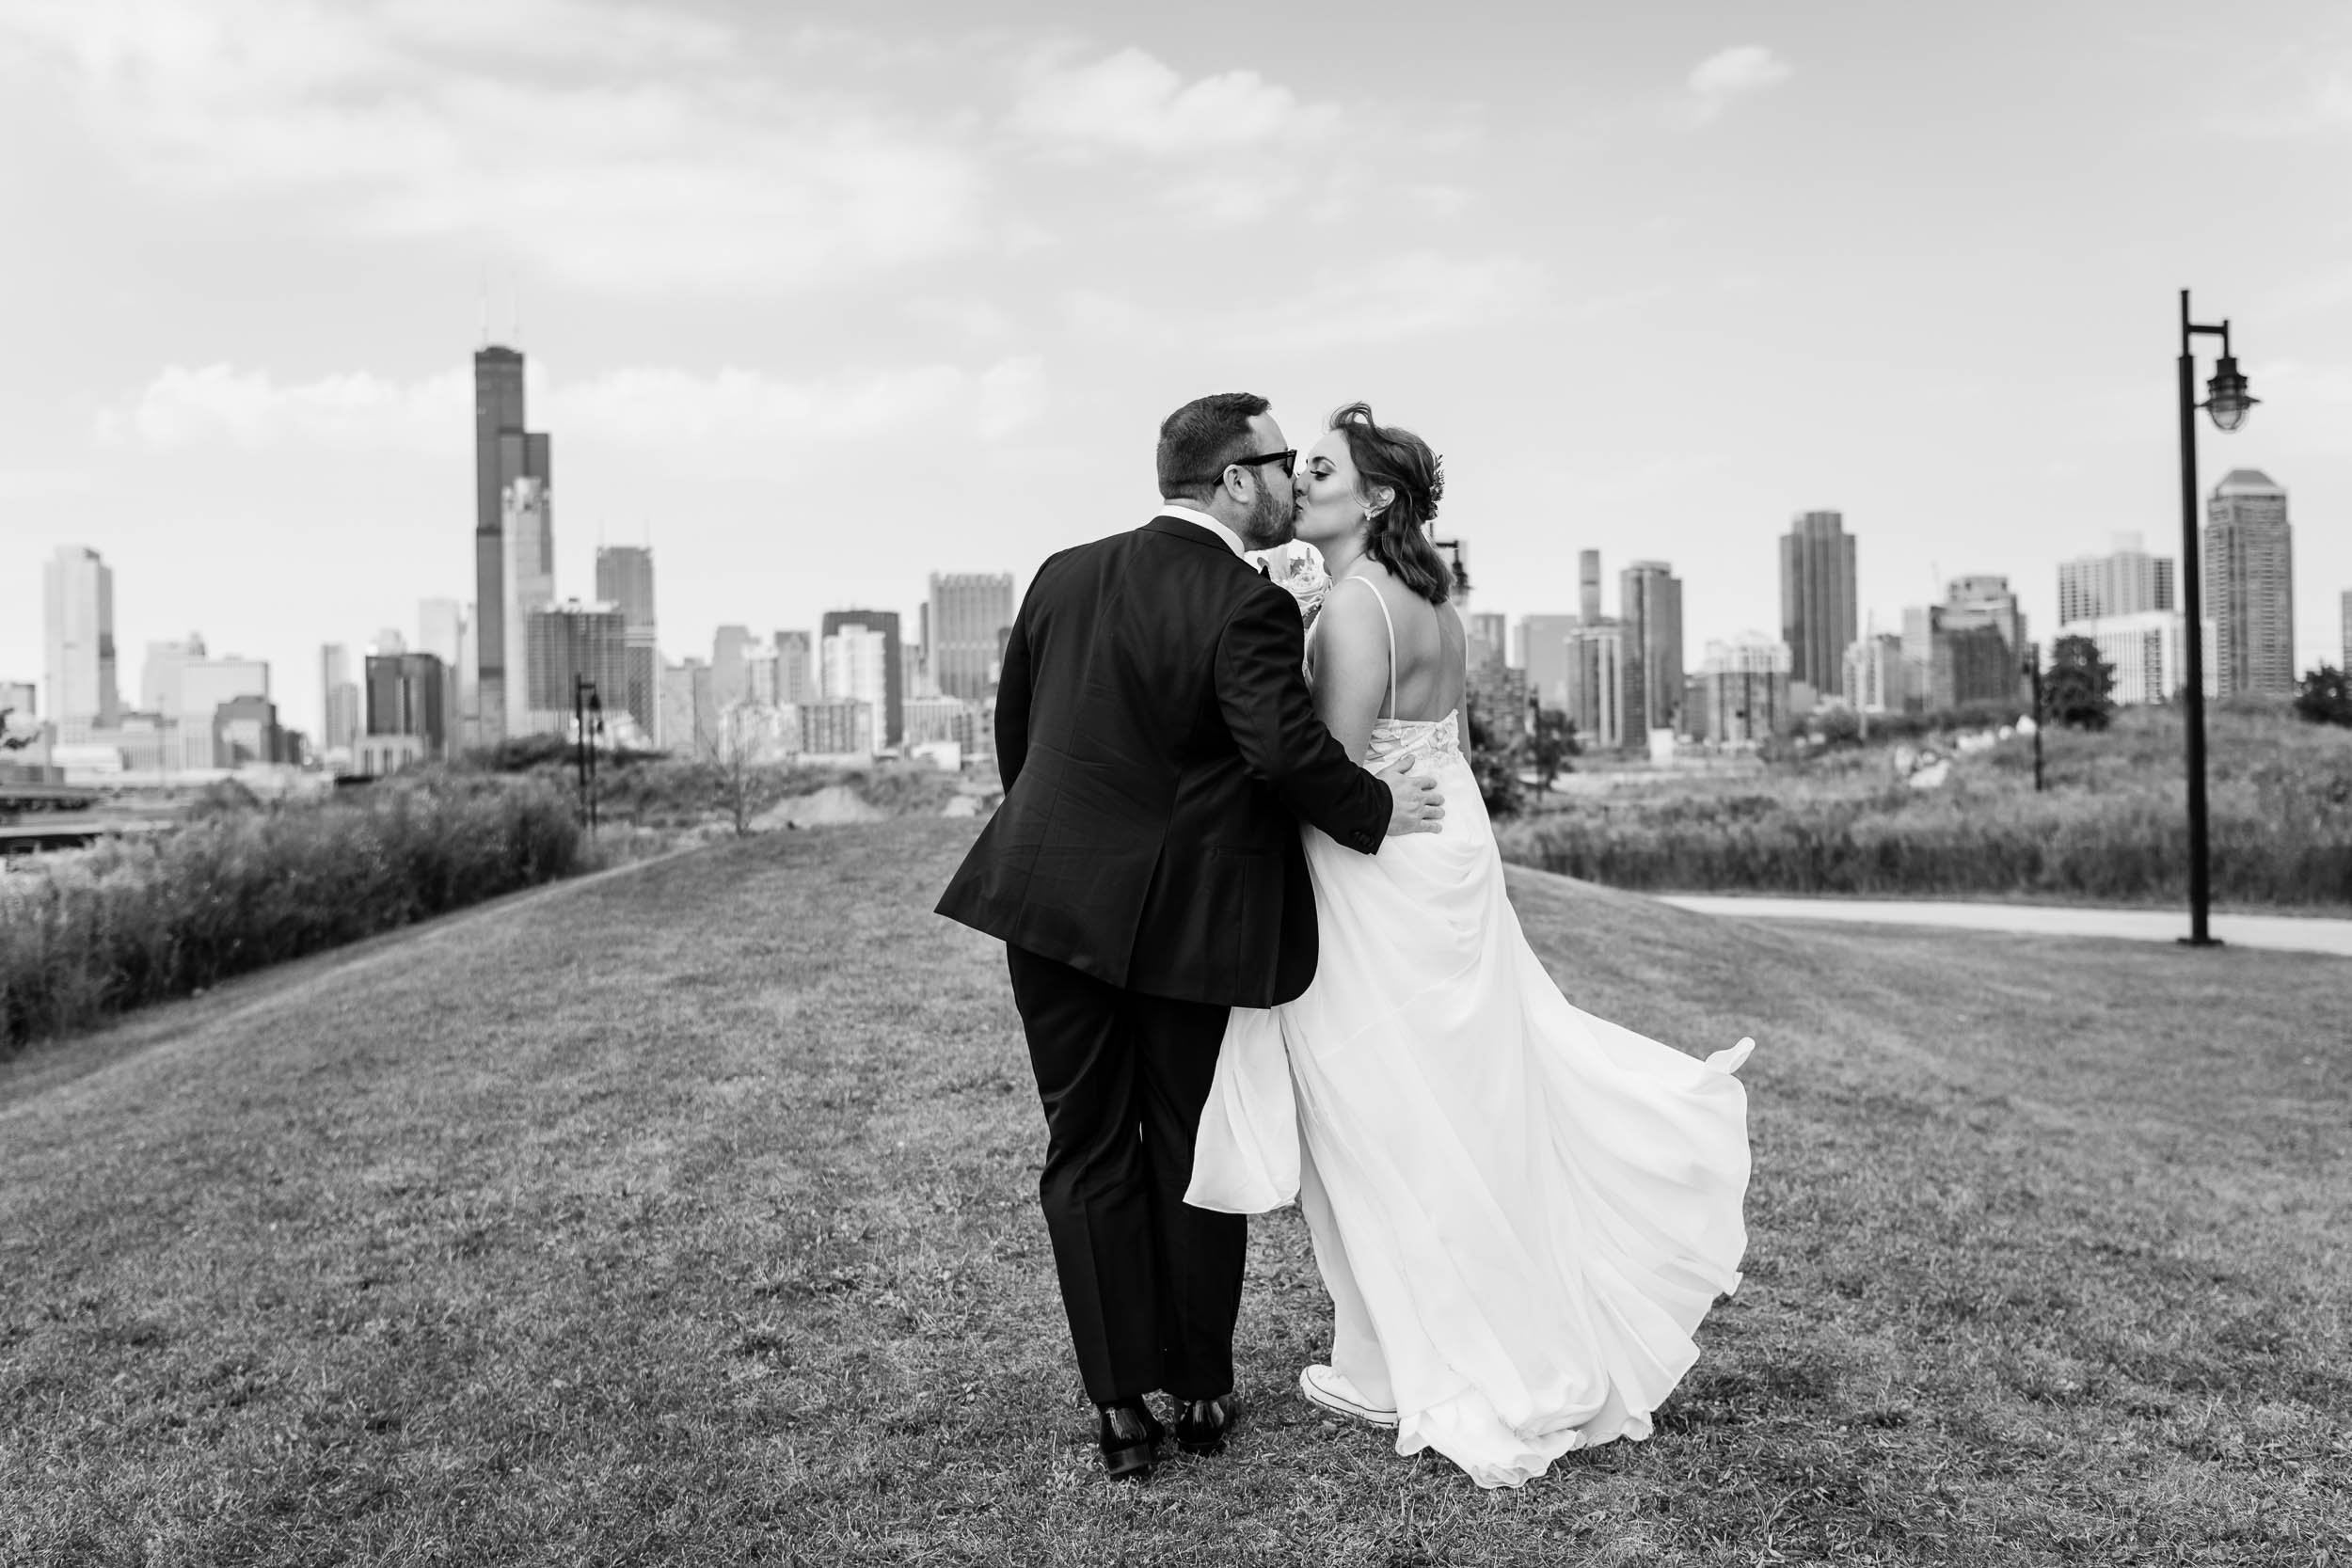 Ping Tom Park | Outdoor Wedding Party Photo | Chicago IL